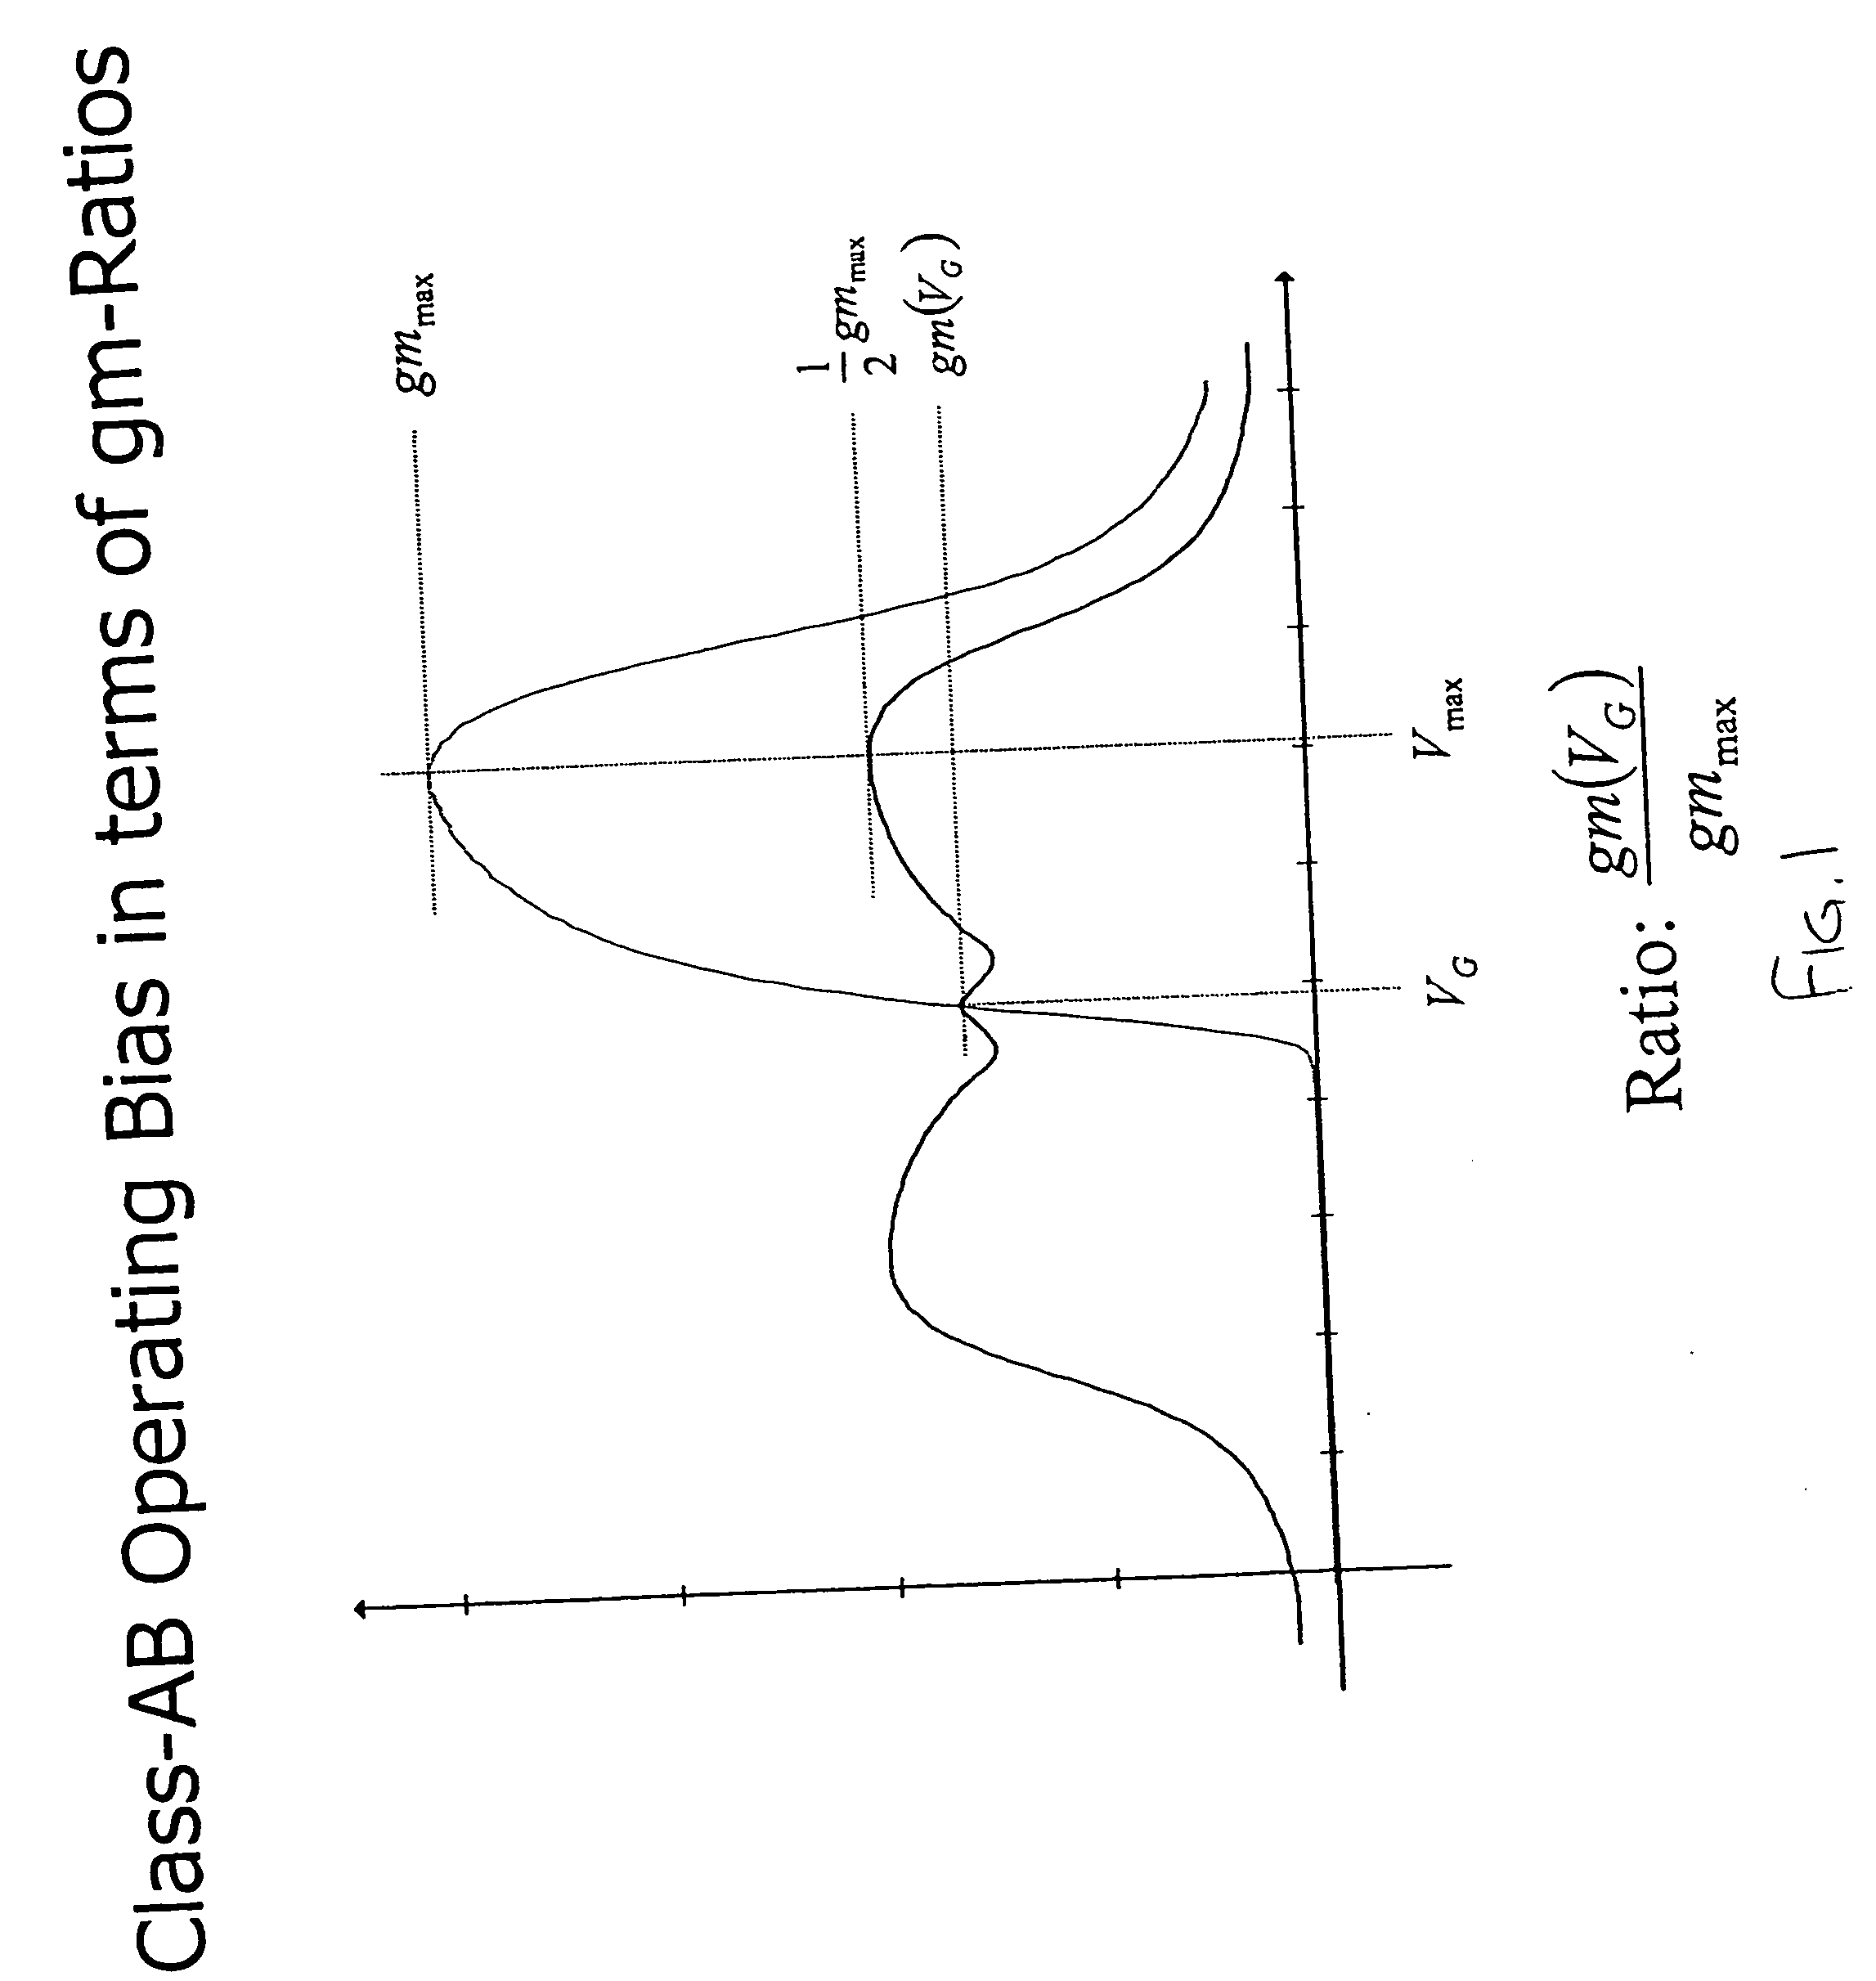 Automatic biasing of a power device for linear operation